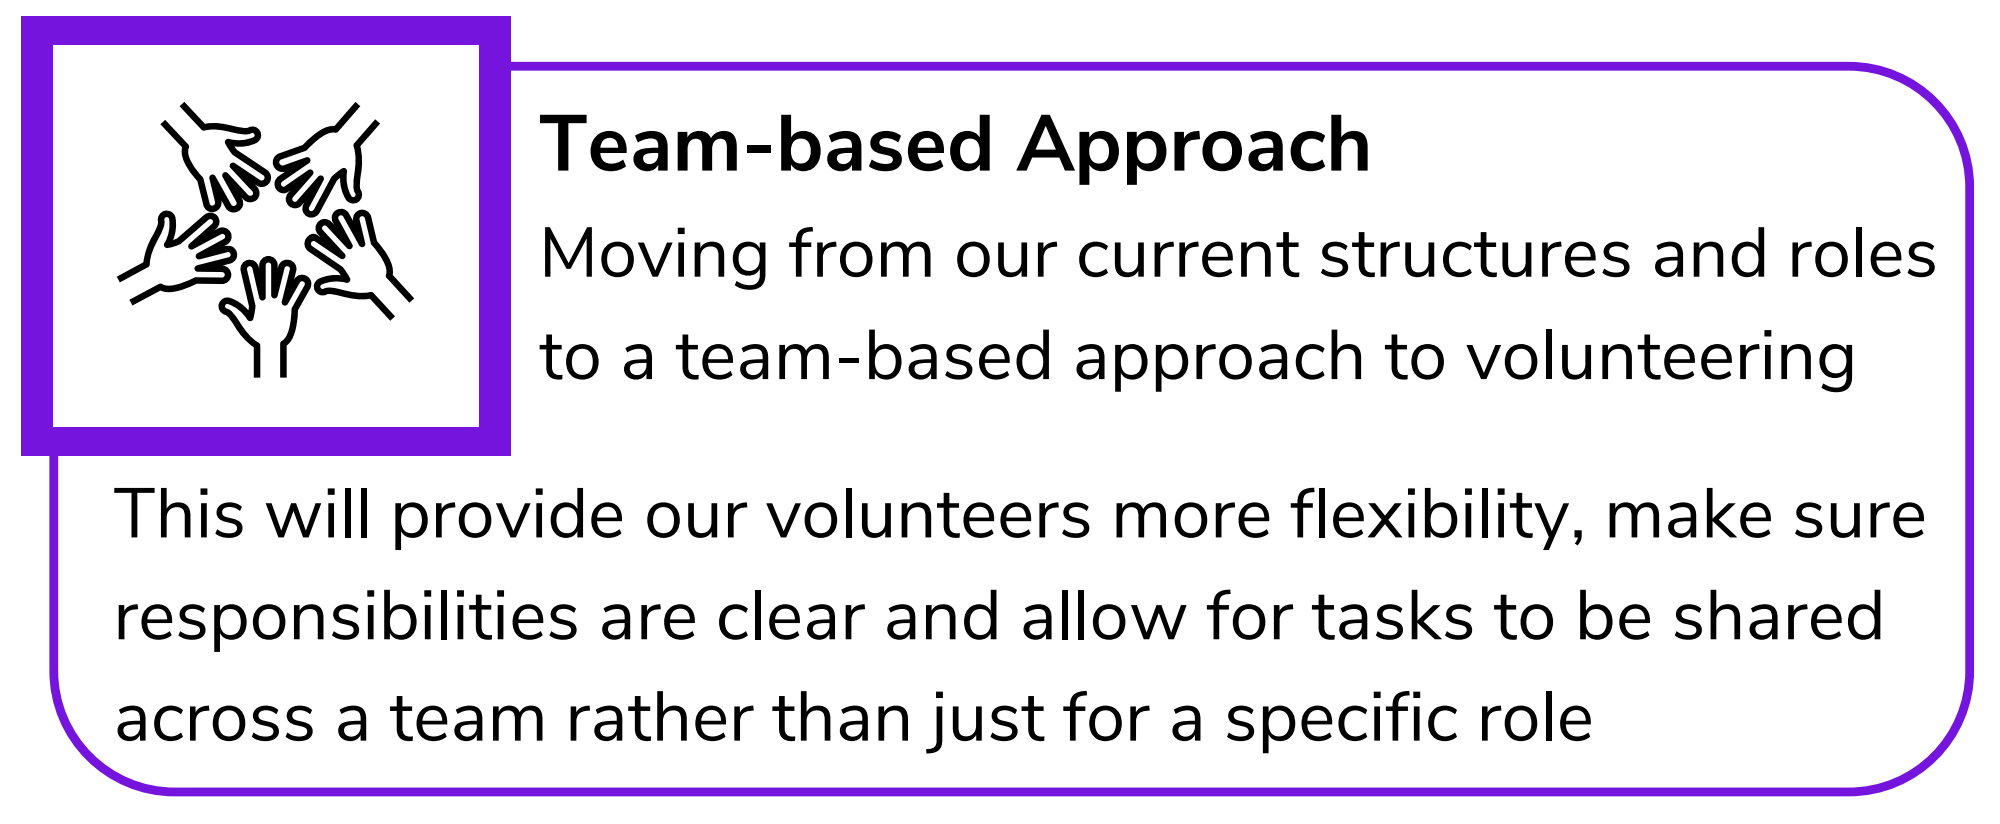 Teams based approach